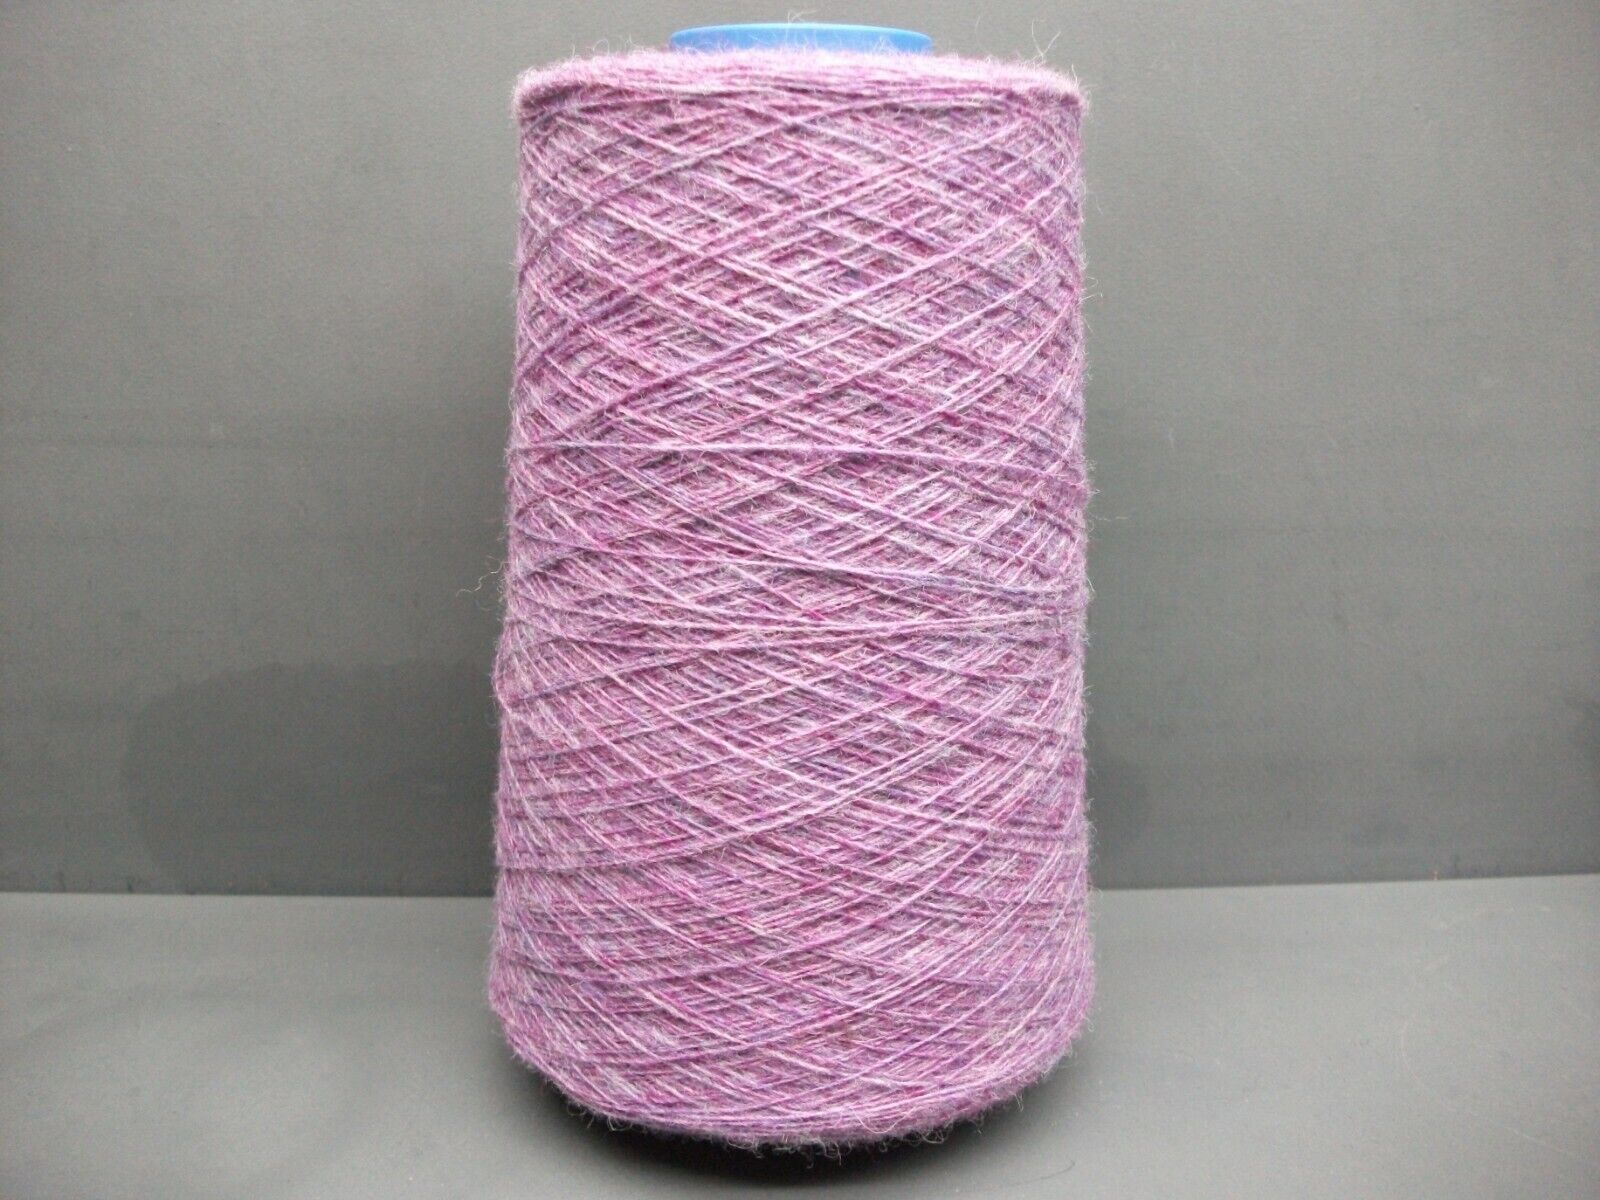 100% Shetland Wool Limited Special Price Yarn 100g Cone 2Ply Single Various Gifts NM 9 Sh